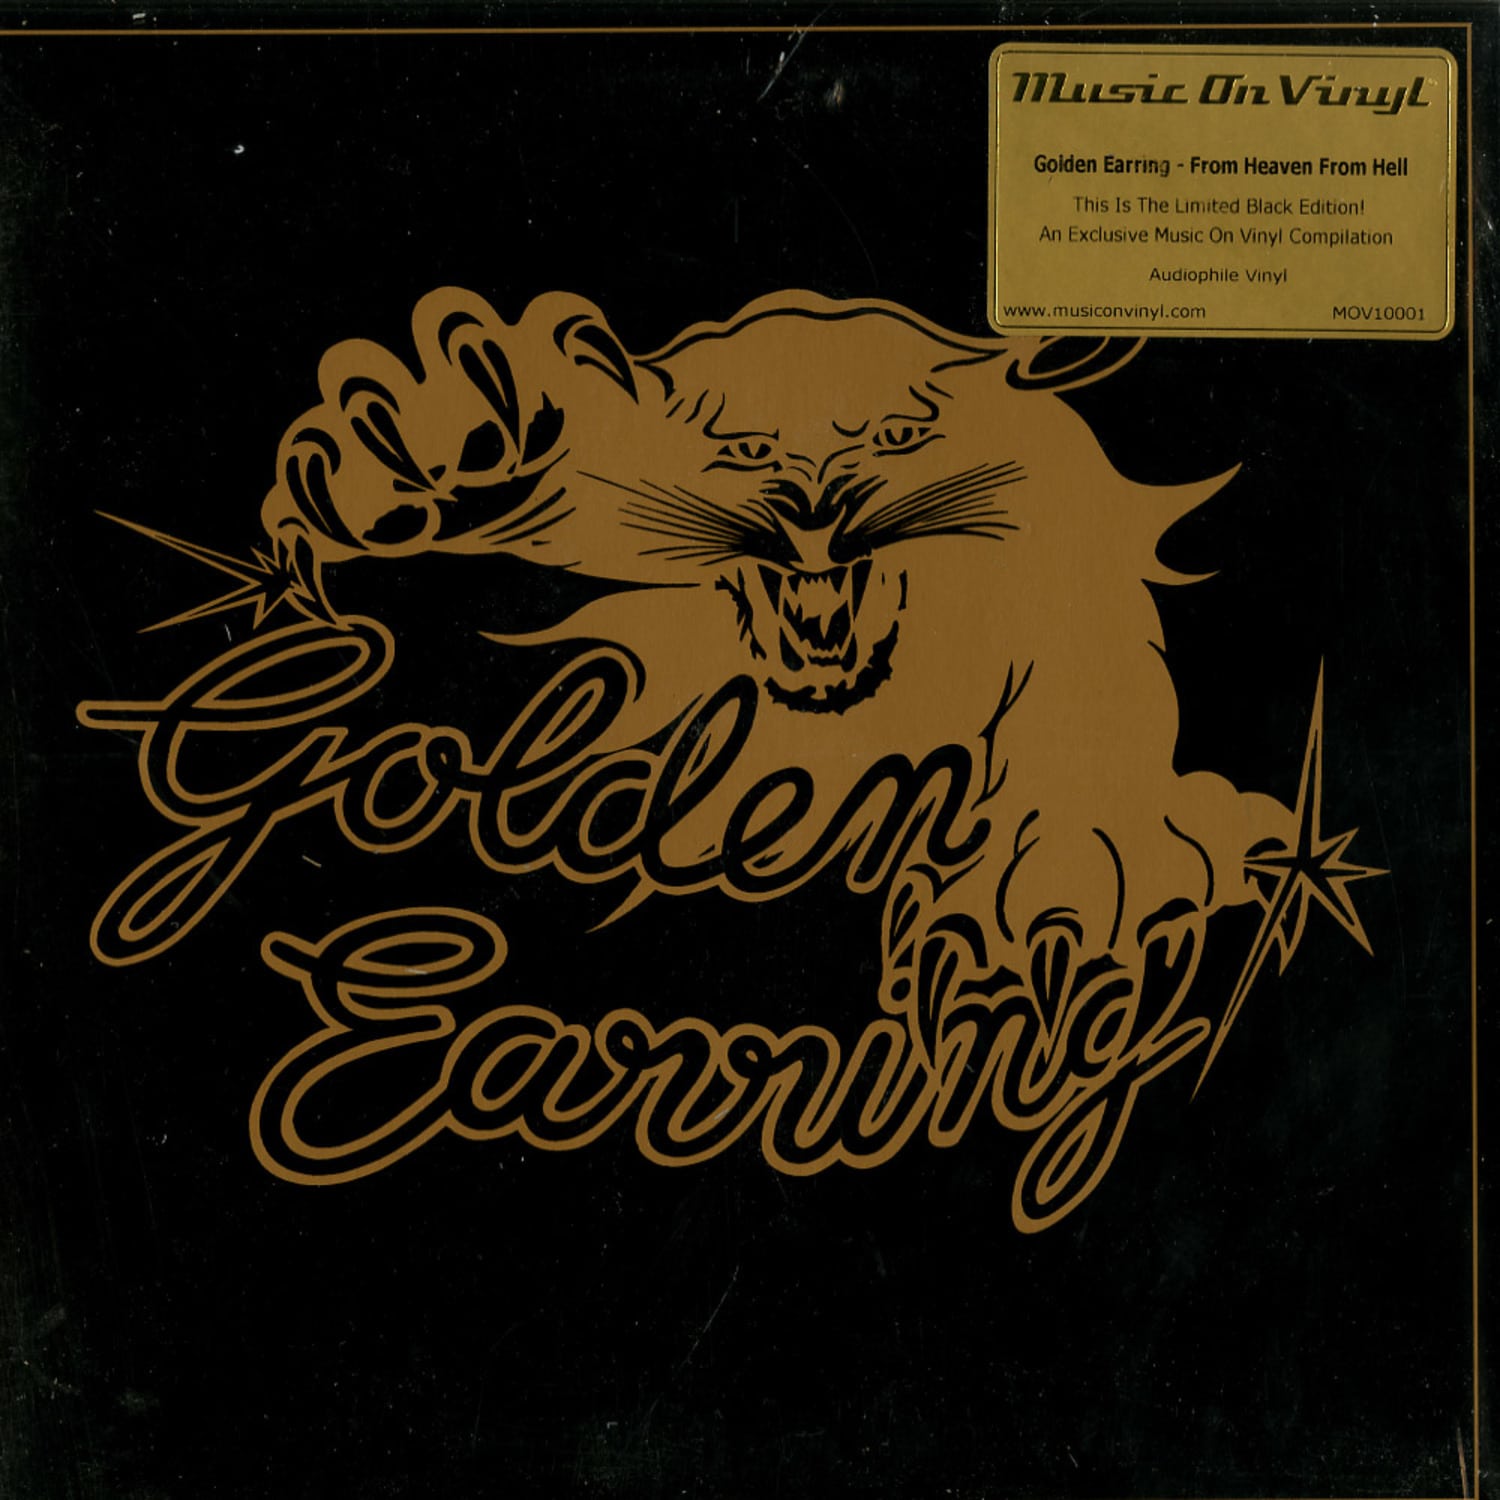 Golden Earring - FROM HEAVEN FROM HELL 